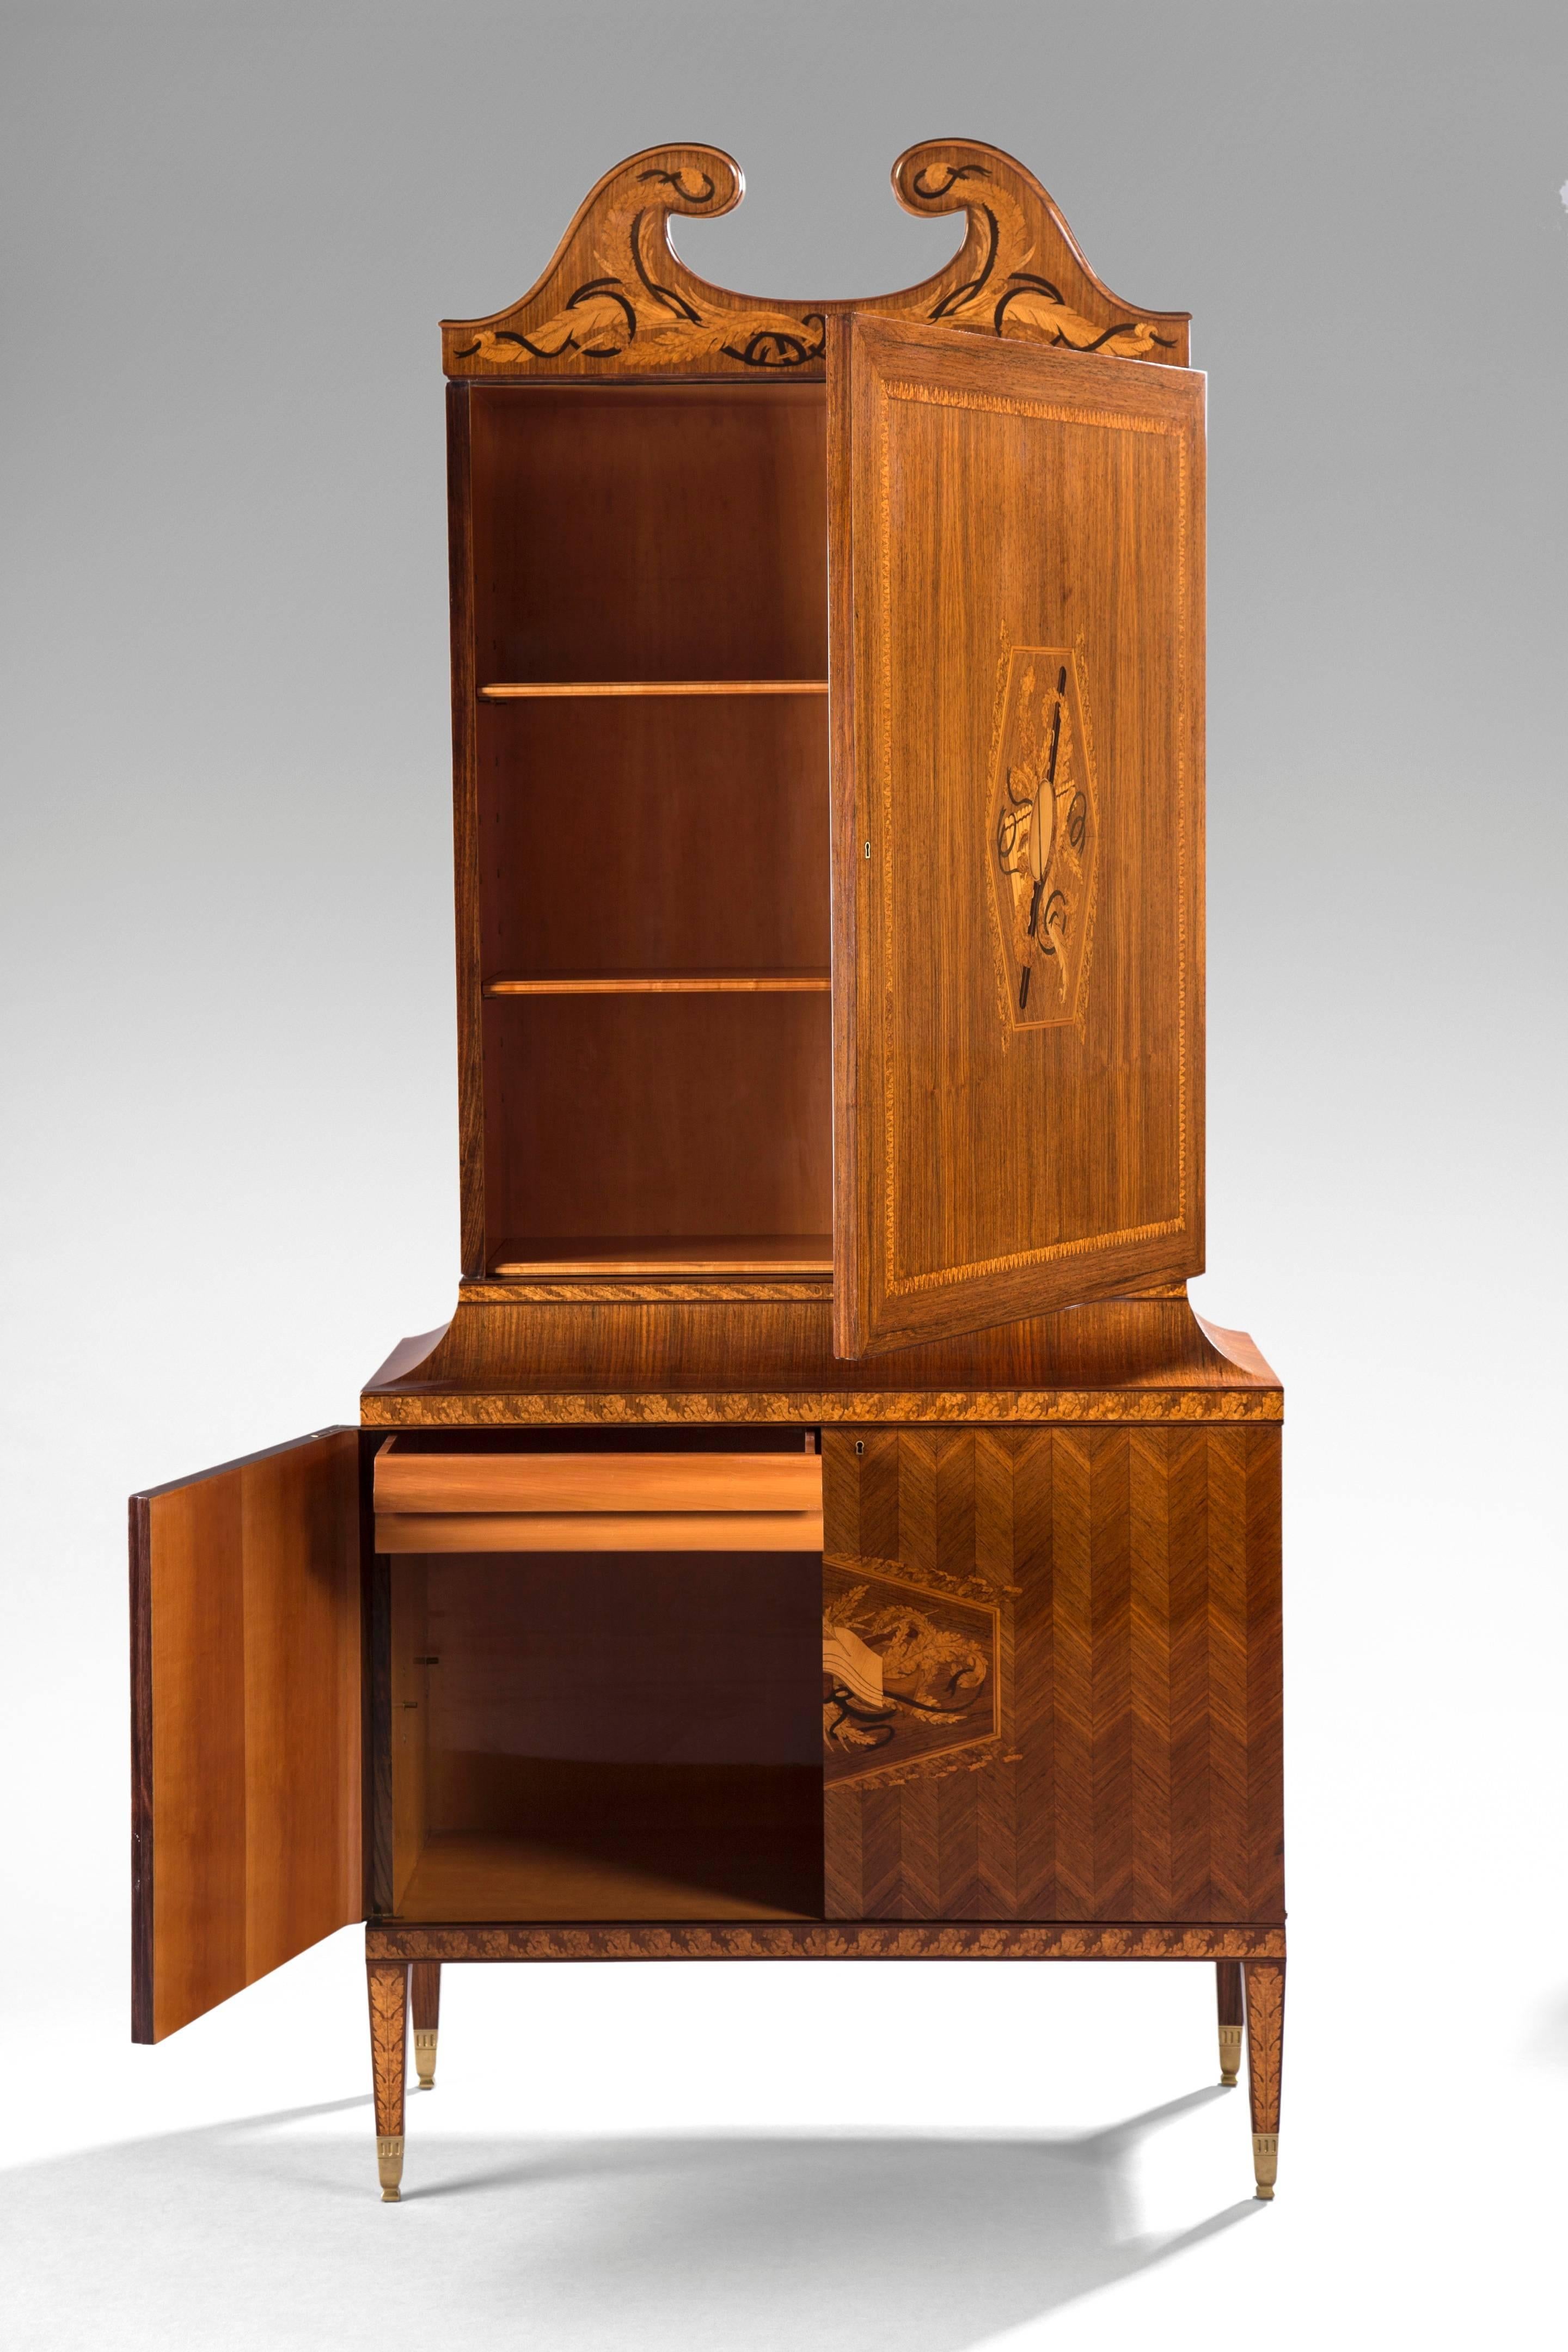 A superb example of the finest 20th century inlaid wood marquetry; the cabinet boasts two deftly executed trophy reserves and a glorious crown designed by Gio Ponti's protégé Giovanni Gariboldi. The acute attention to detail creates a wonderfully